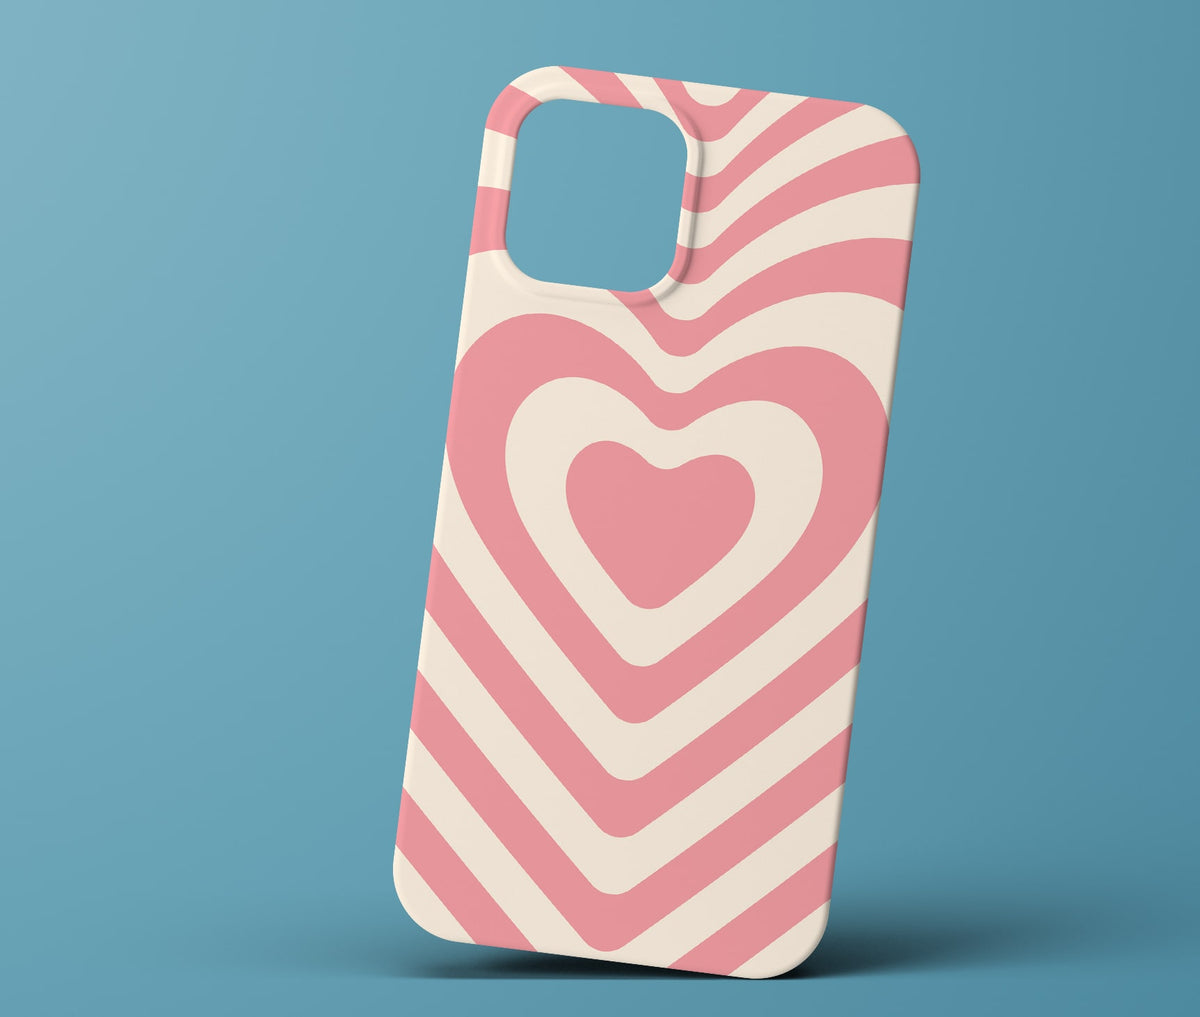 Pink heart phonecase